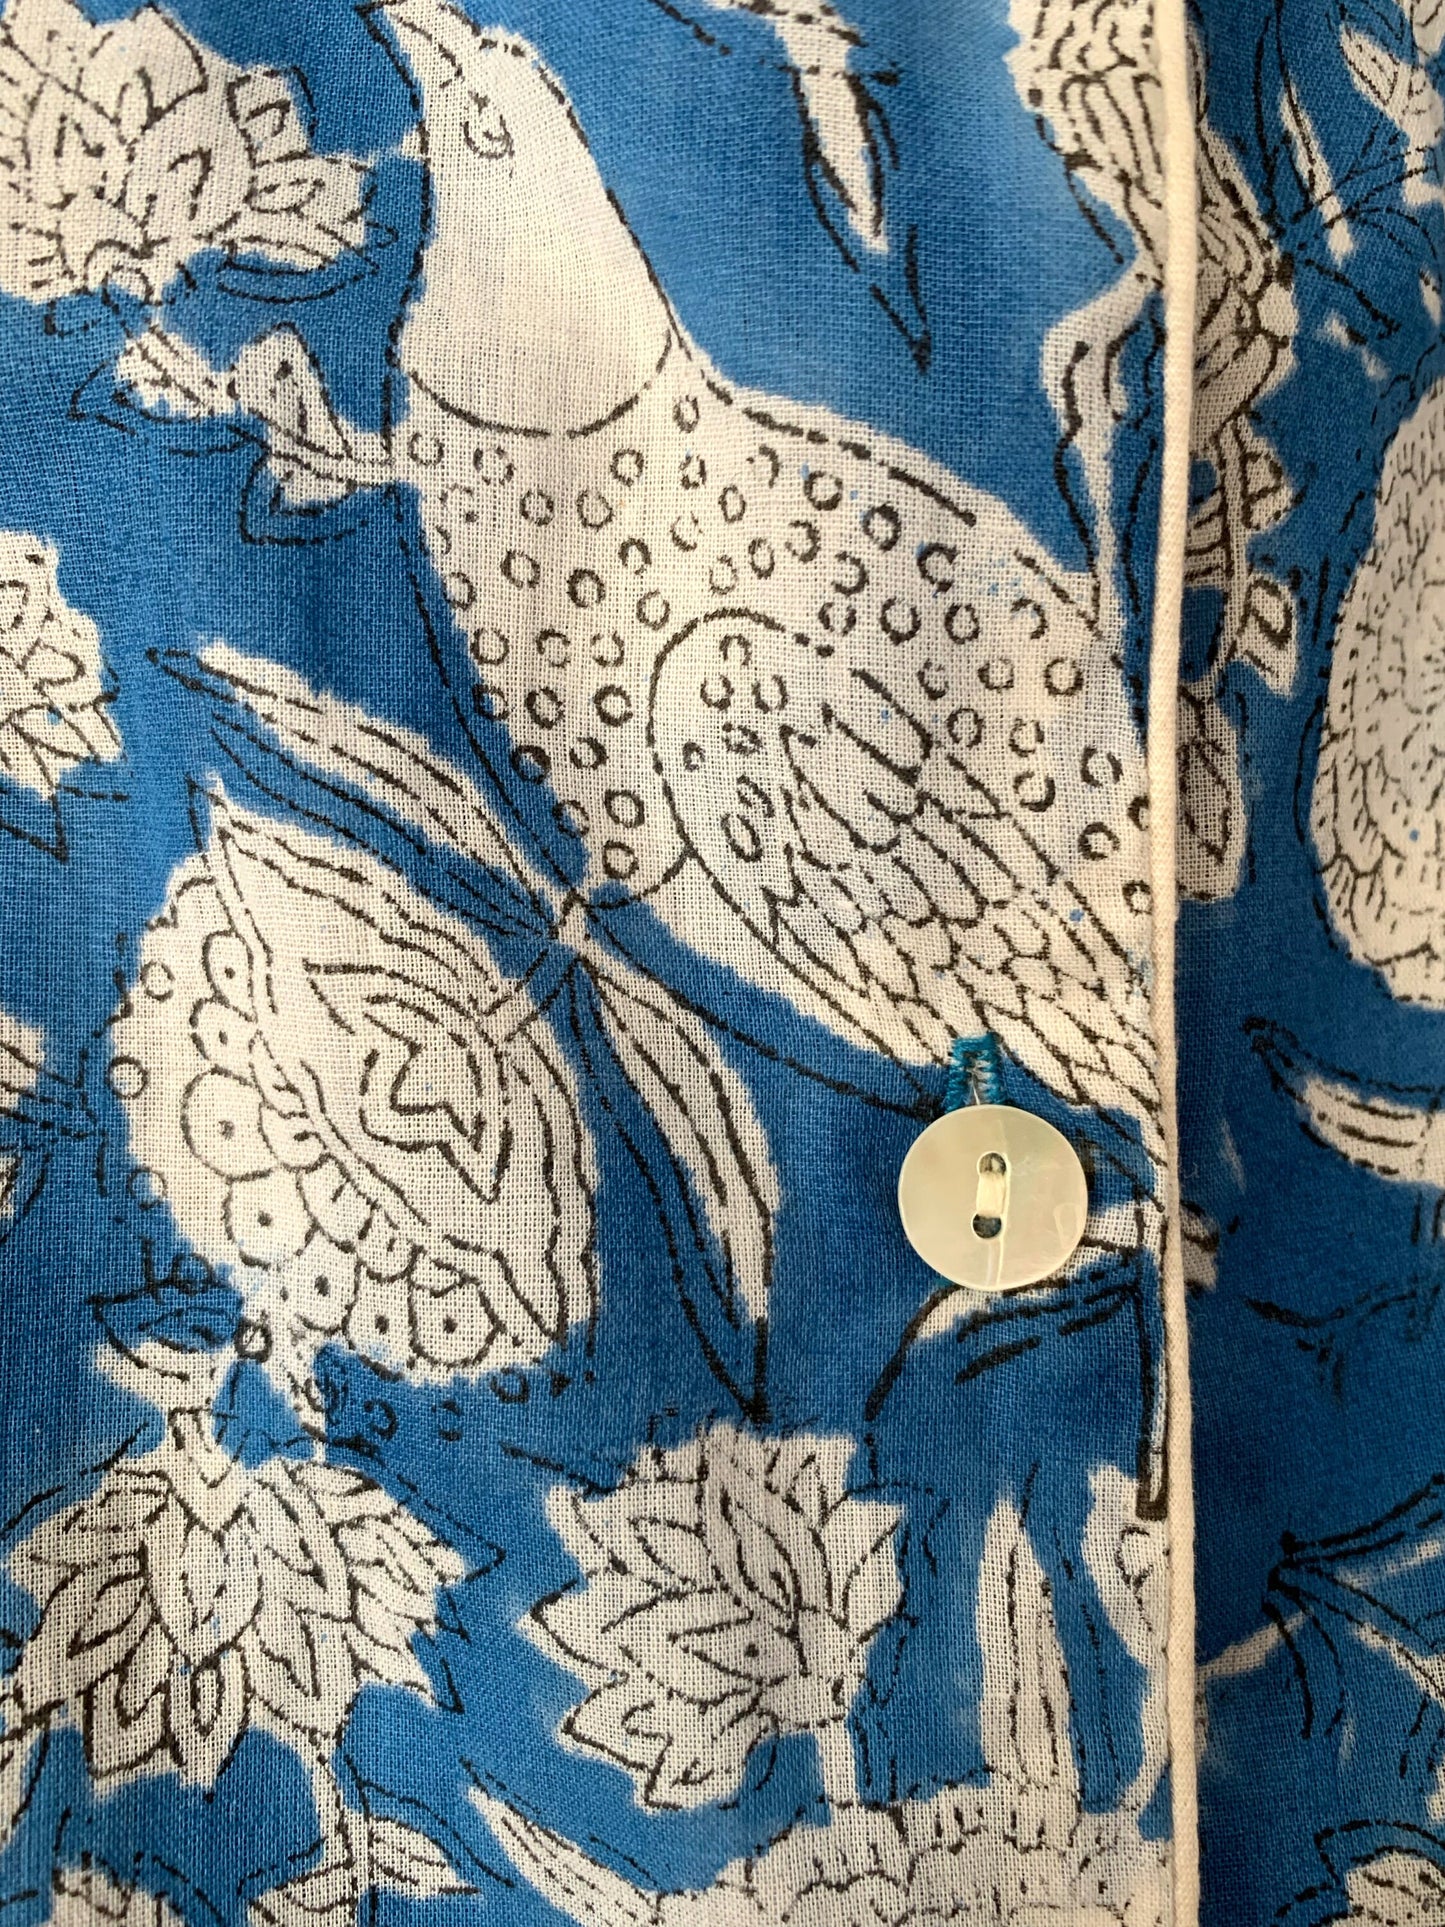 Gift SET · Long-sleeved nightgown &amp; matching slippers · Pure cotton block print handmade in India · Blue white birds